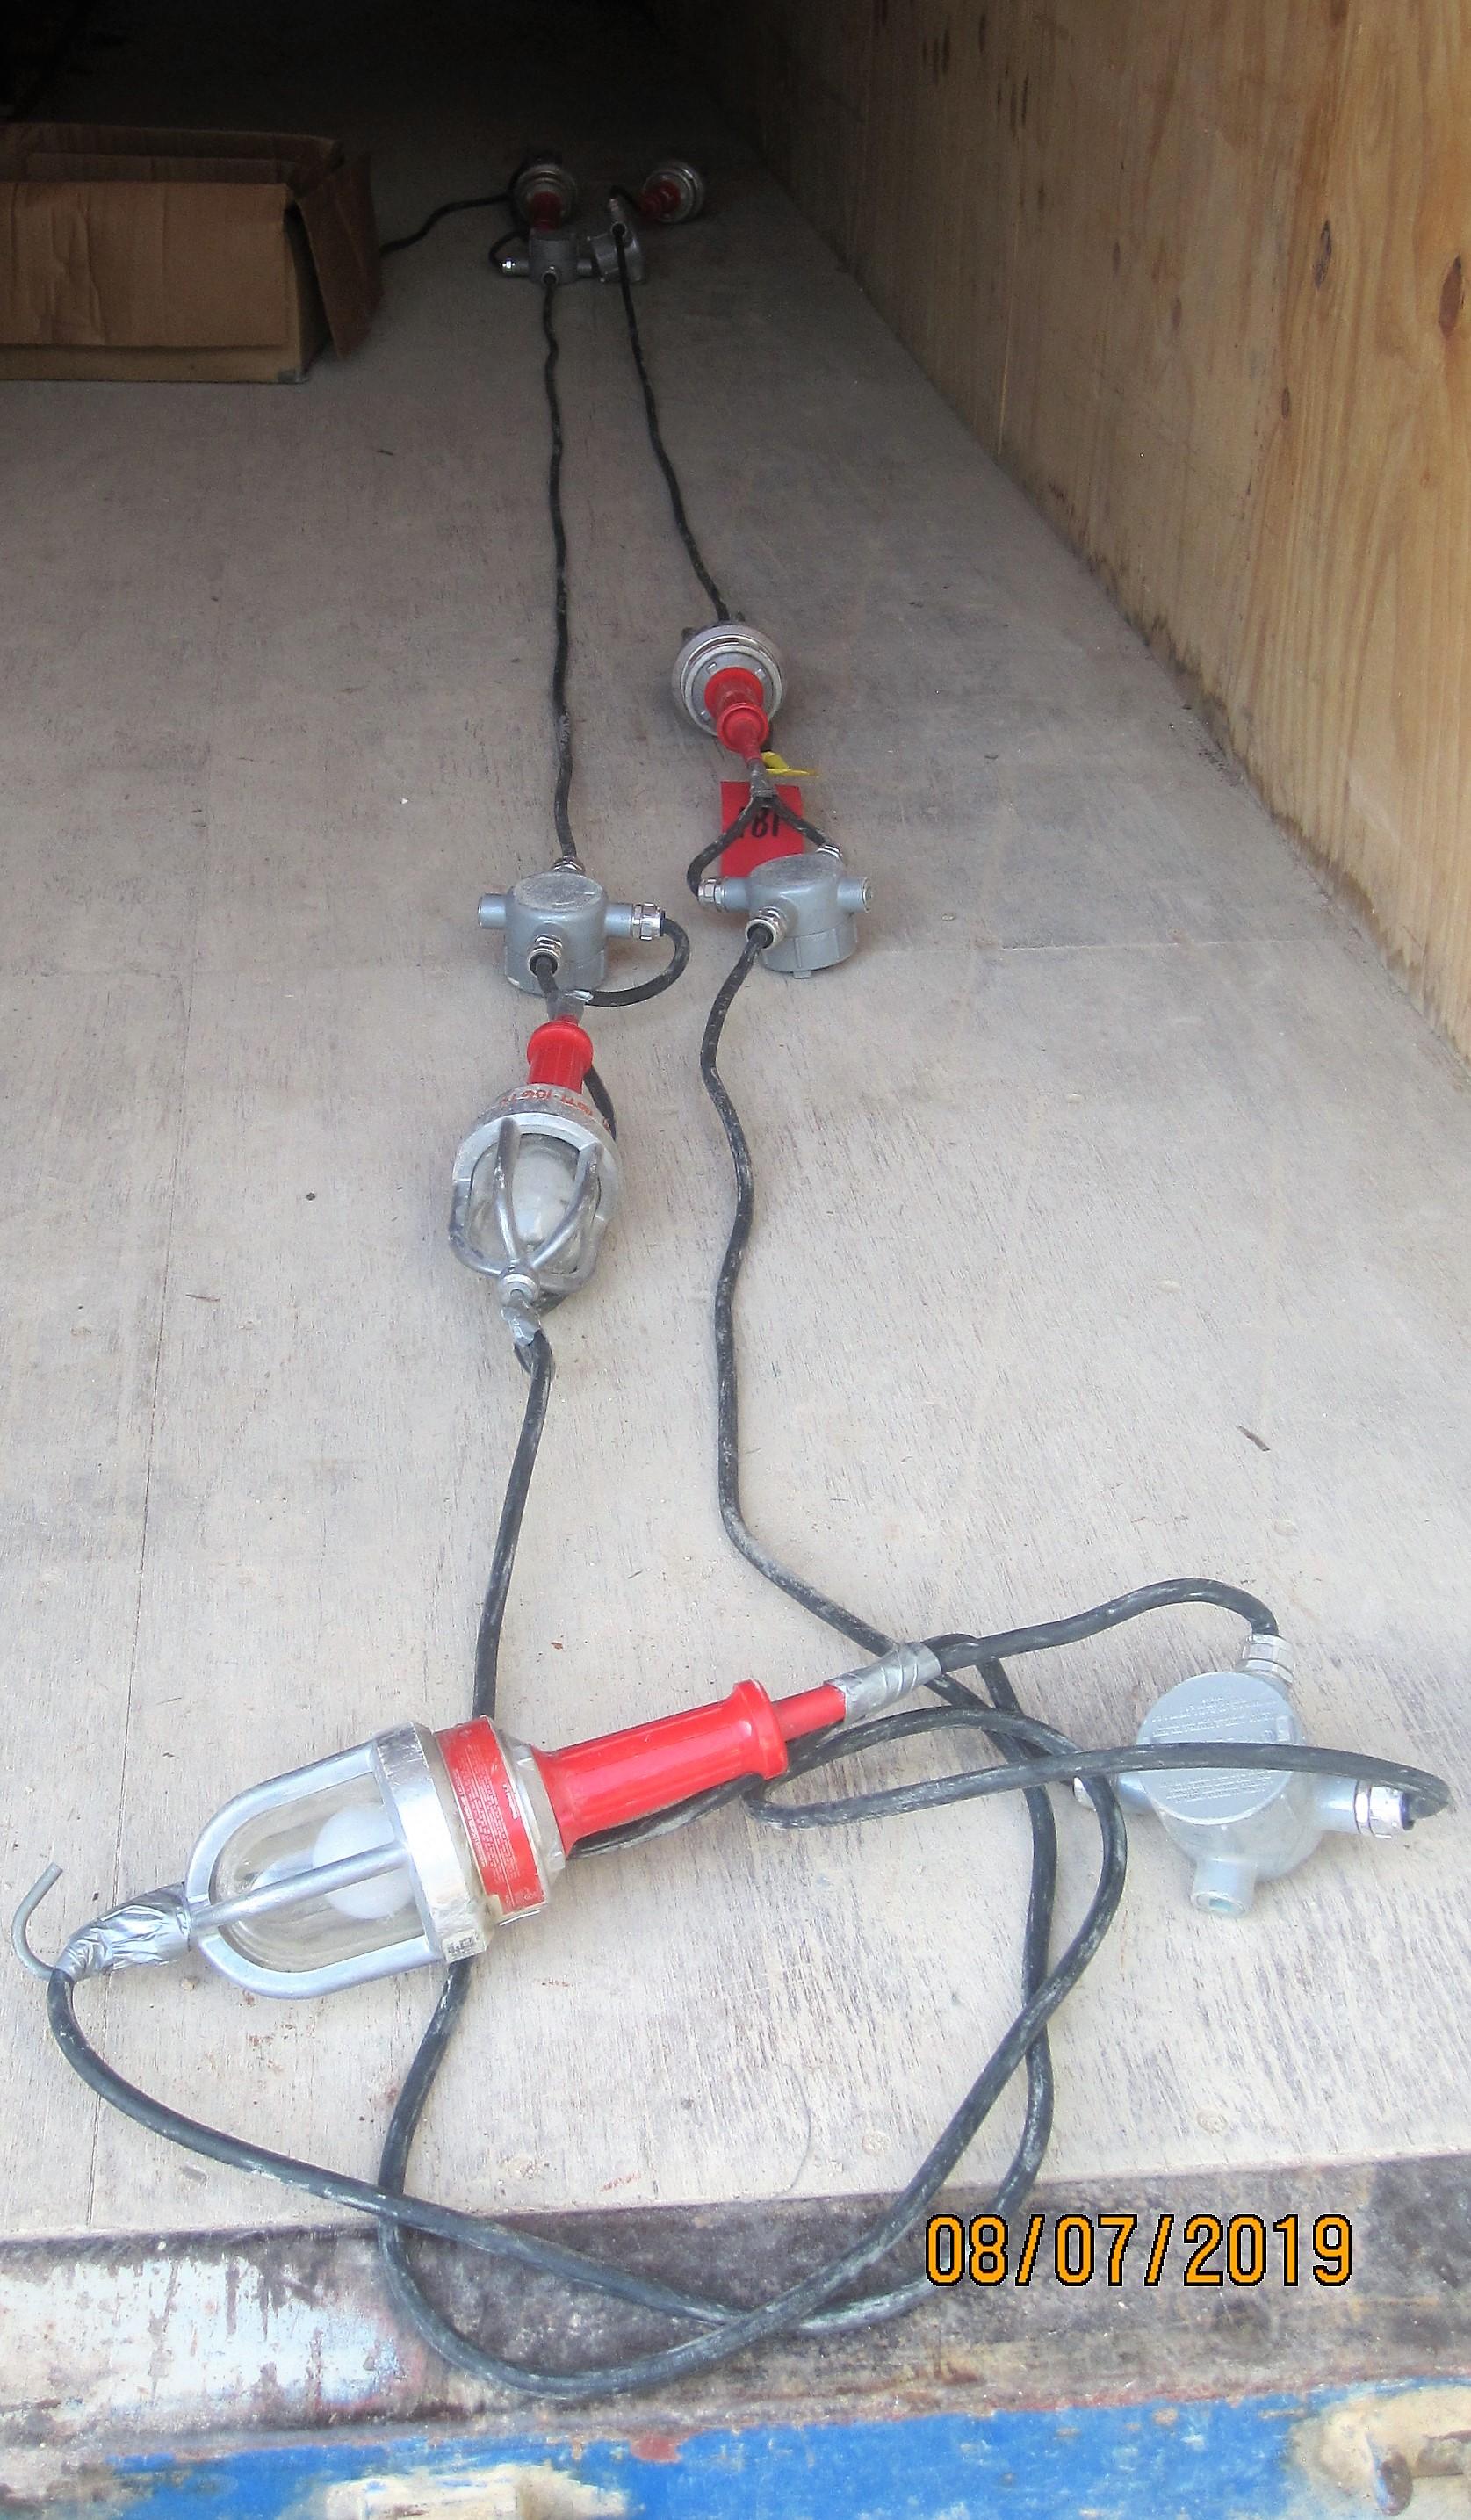 Woodhead Haz Location String Lights, Reserve is Off! This Item Will Sell!